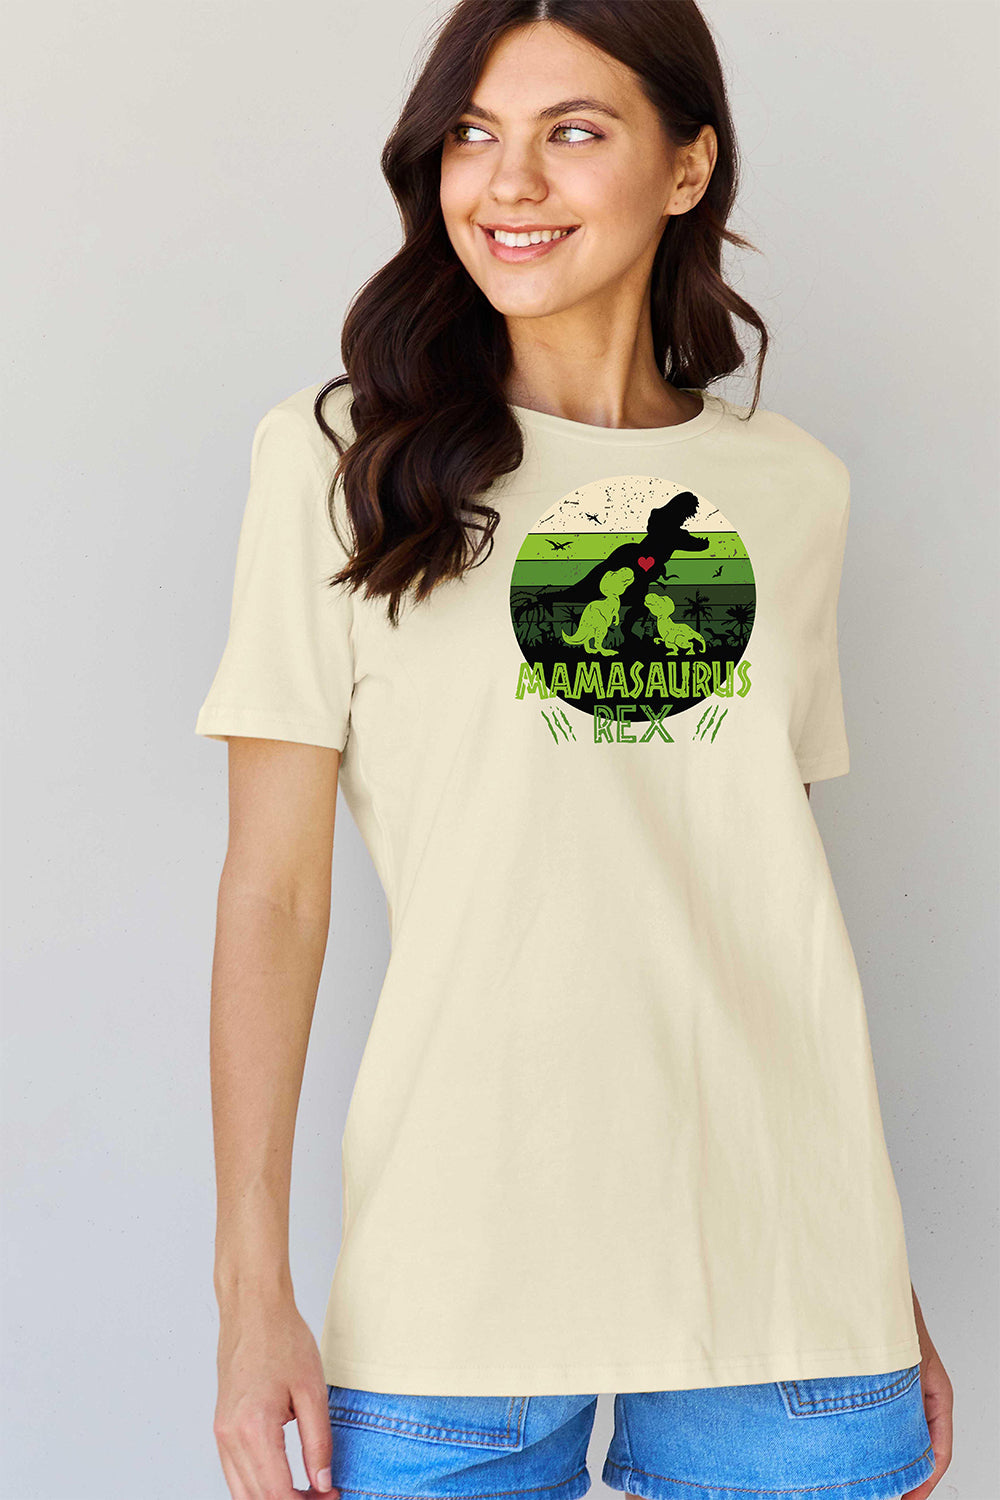 Trendsi Ivory / S Simply Love Full Size MAMASAURUS REX Graphic T-Shirt